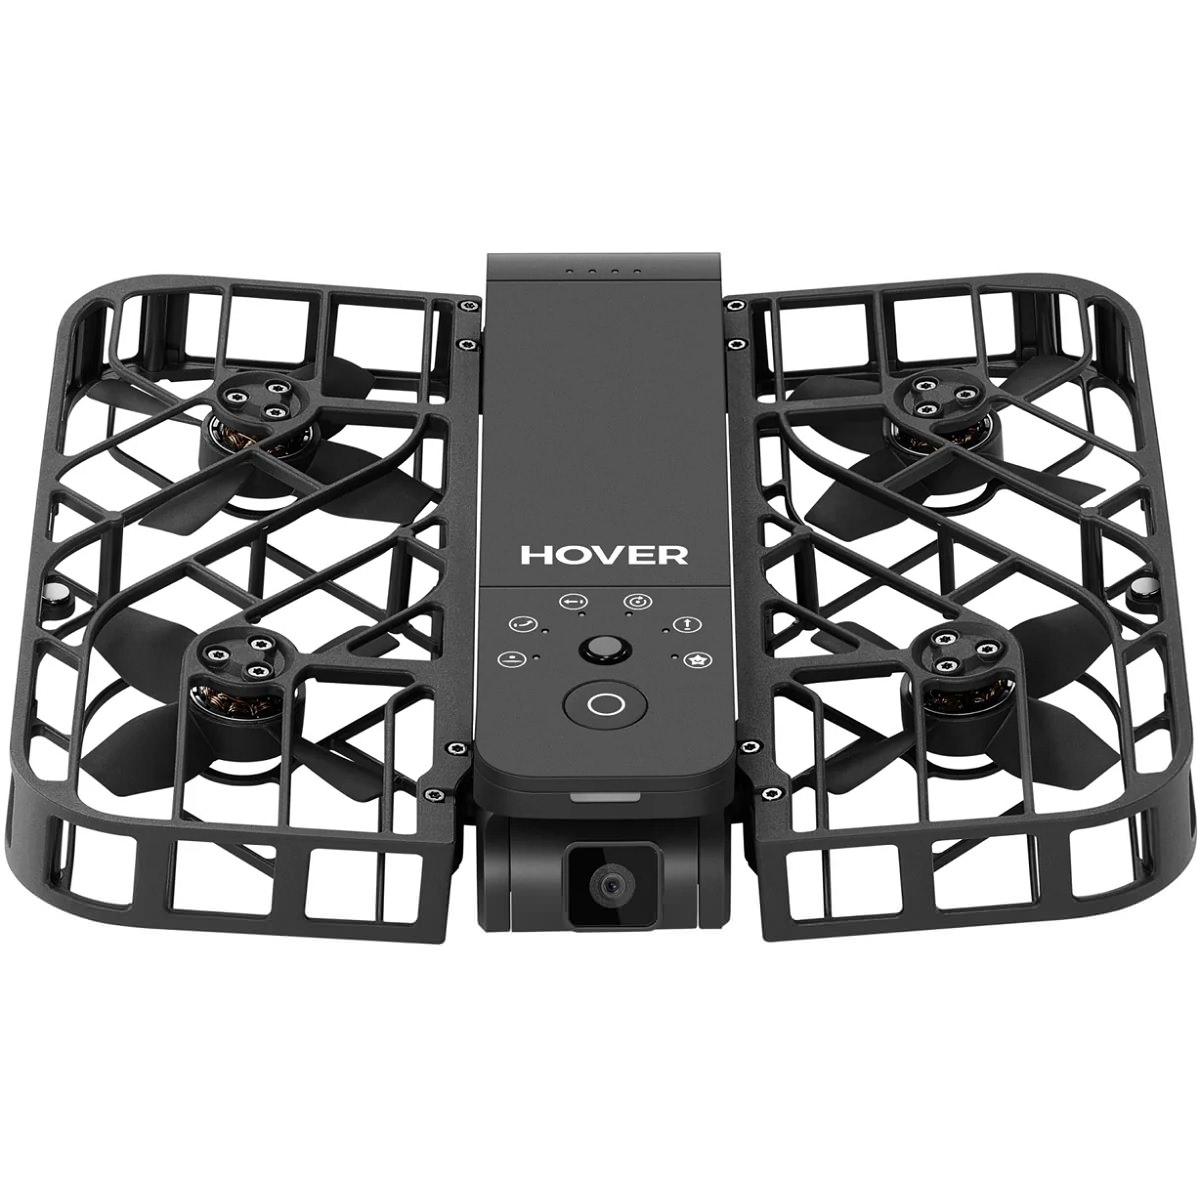 HOVERAir X1 Pocket-Sized Self-Flying Camera Mini Drone For Selfie